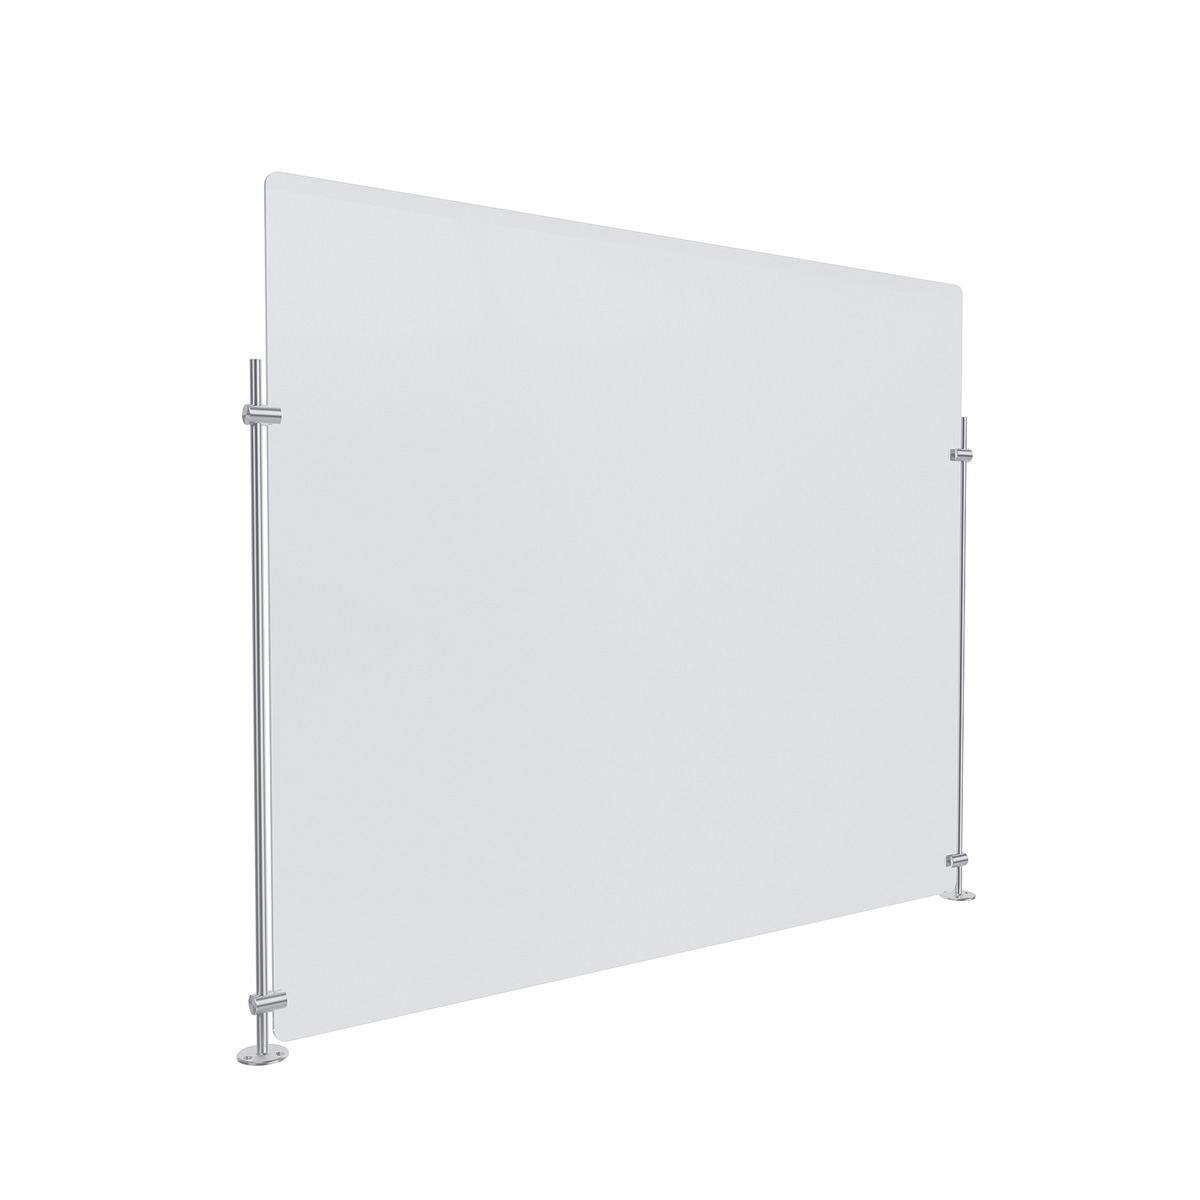 Clear Acrylic Sneeze Guard 36'' Wide x 30'' Tall, with (2) 24'' Tall x 3/8'' Diameter Clear Anodized Aluminum Rods on the Side.